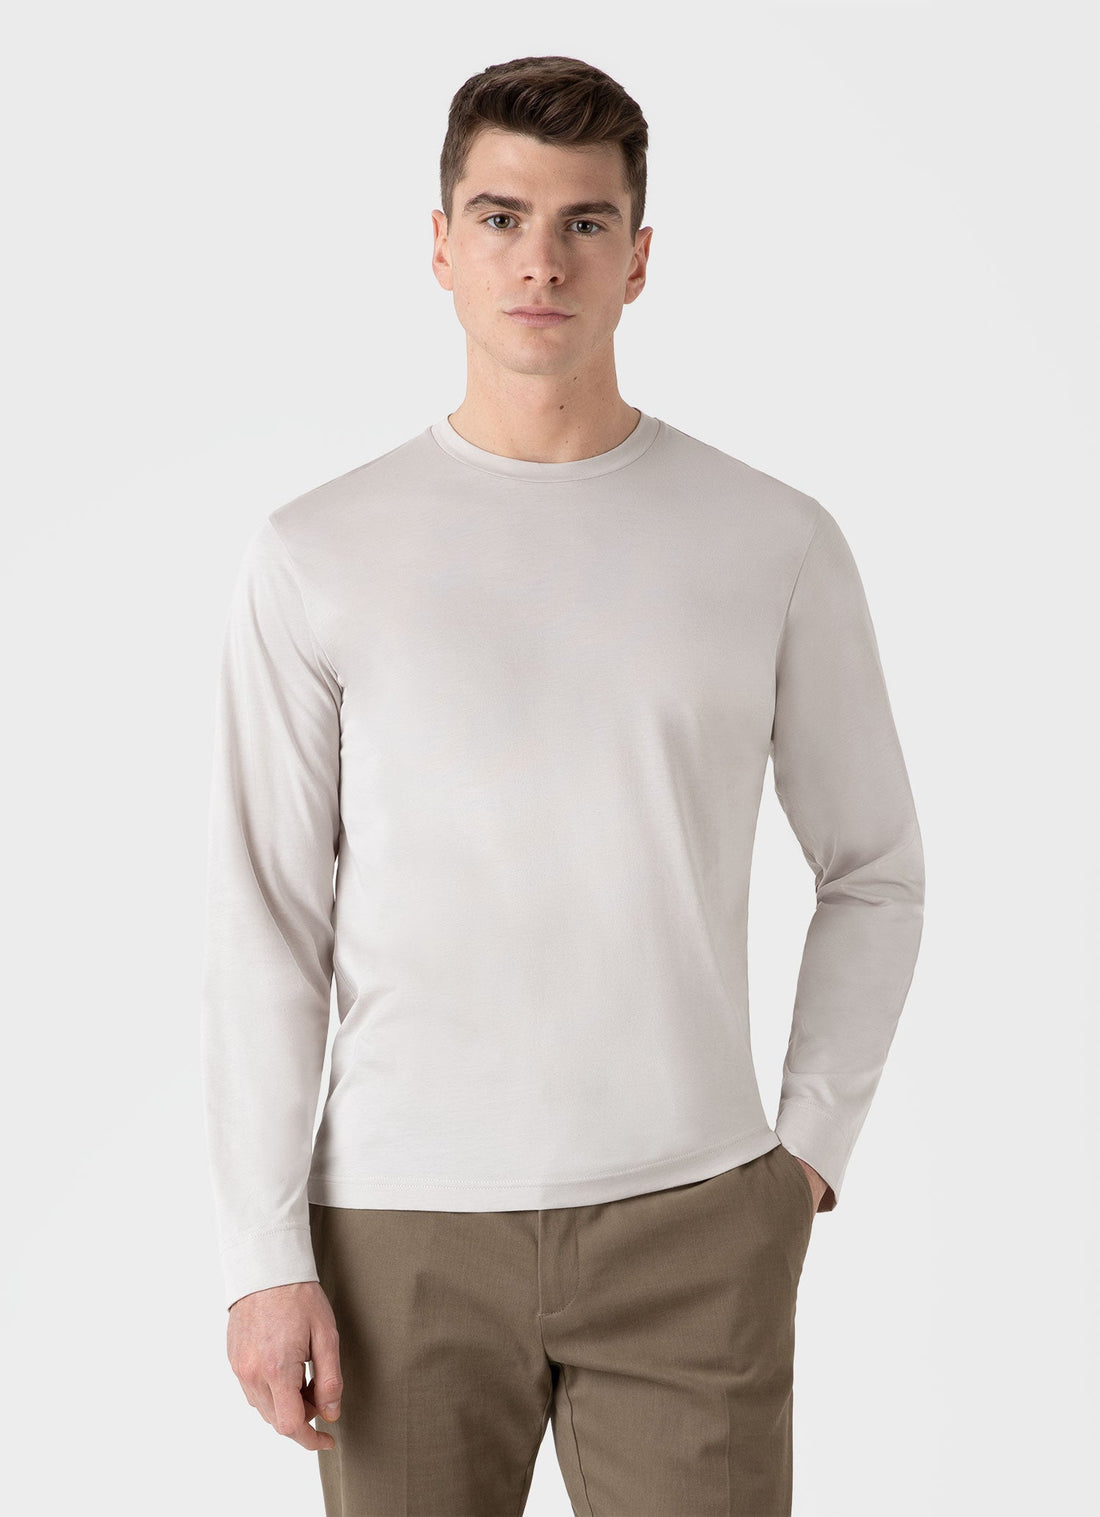 Men's Long Sleeve Riviera Midweight T-shirt in Putty